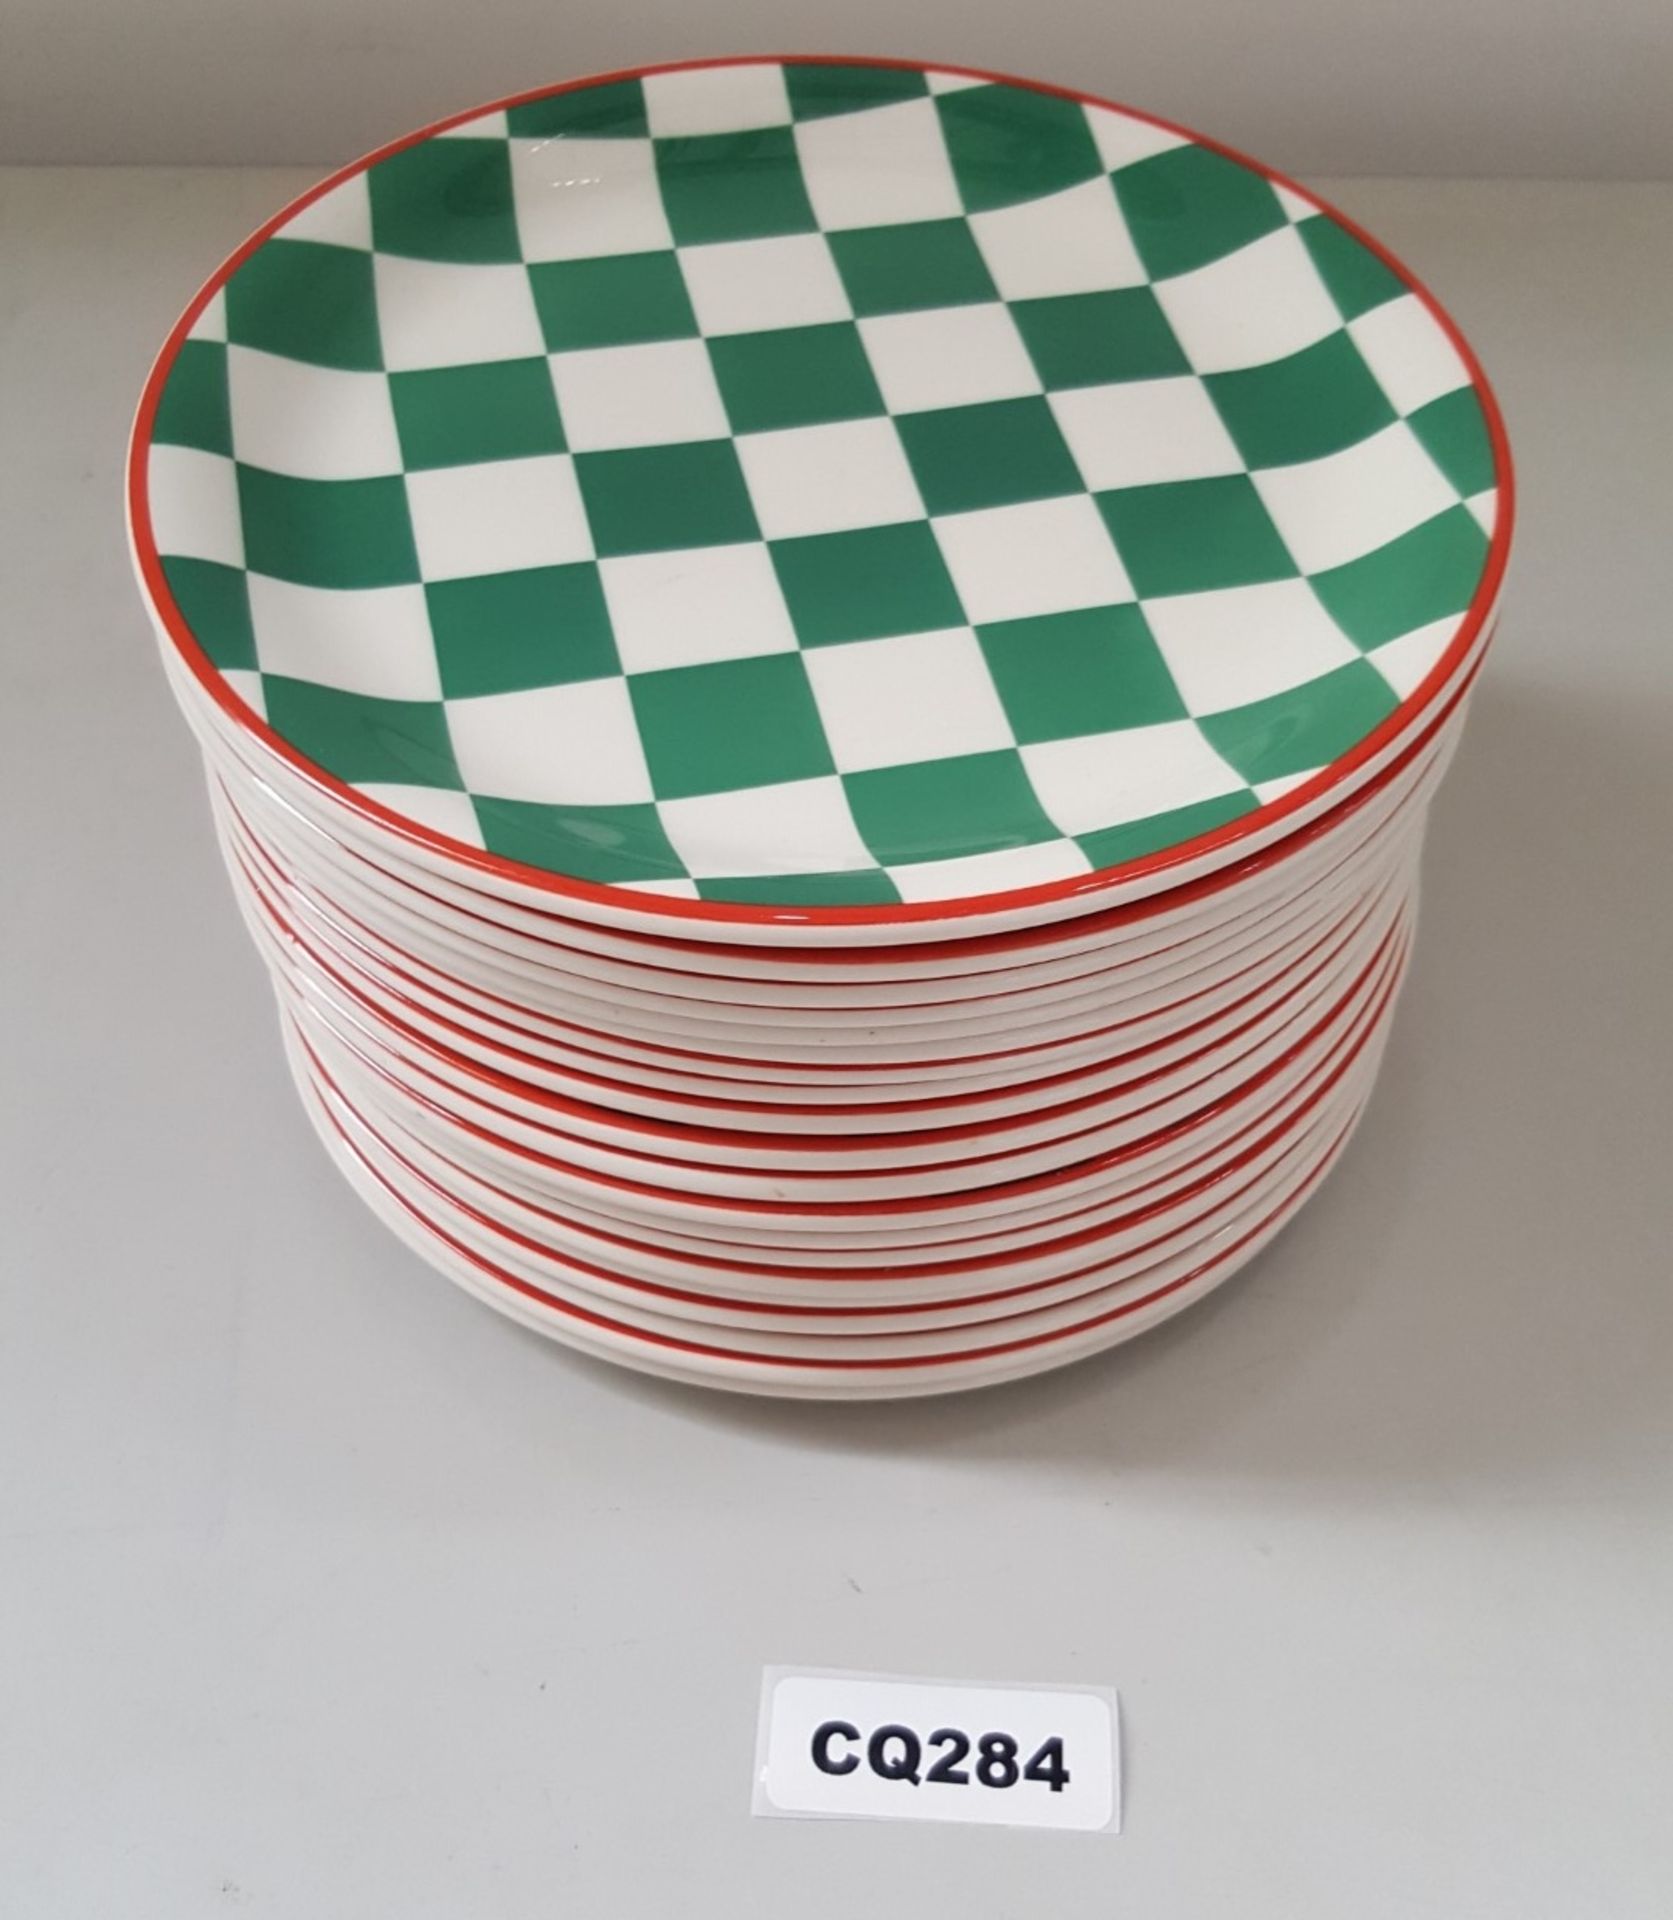 20 x Steelite Plates Checkered Green&White With Red Outline 20CM - Ref CQ284